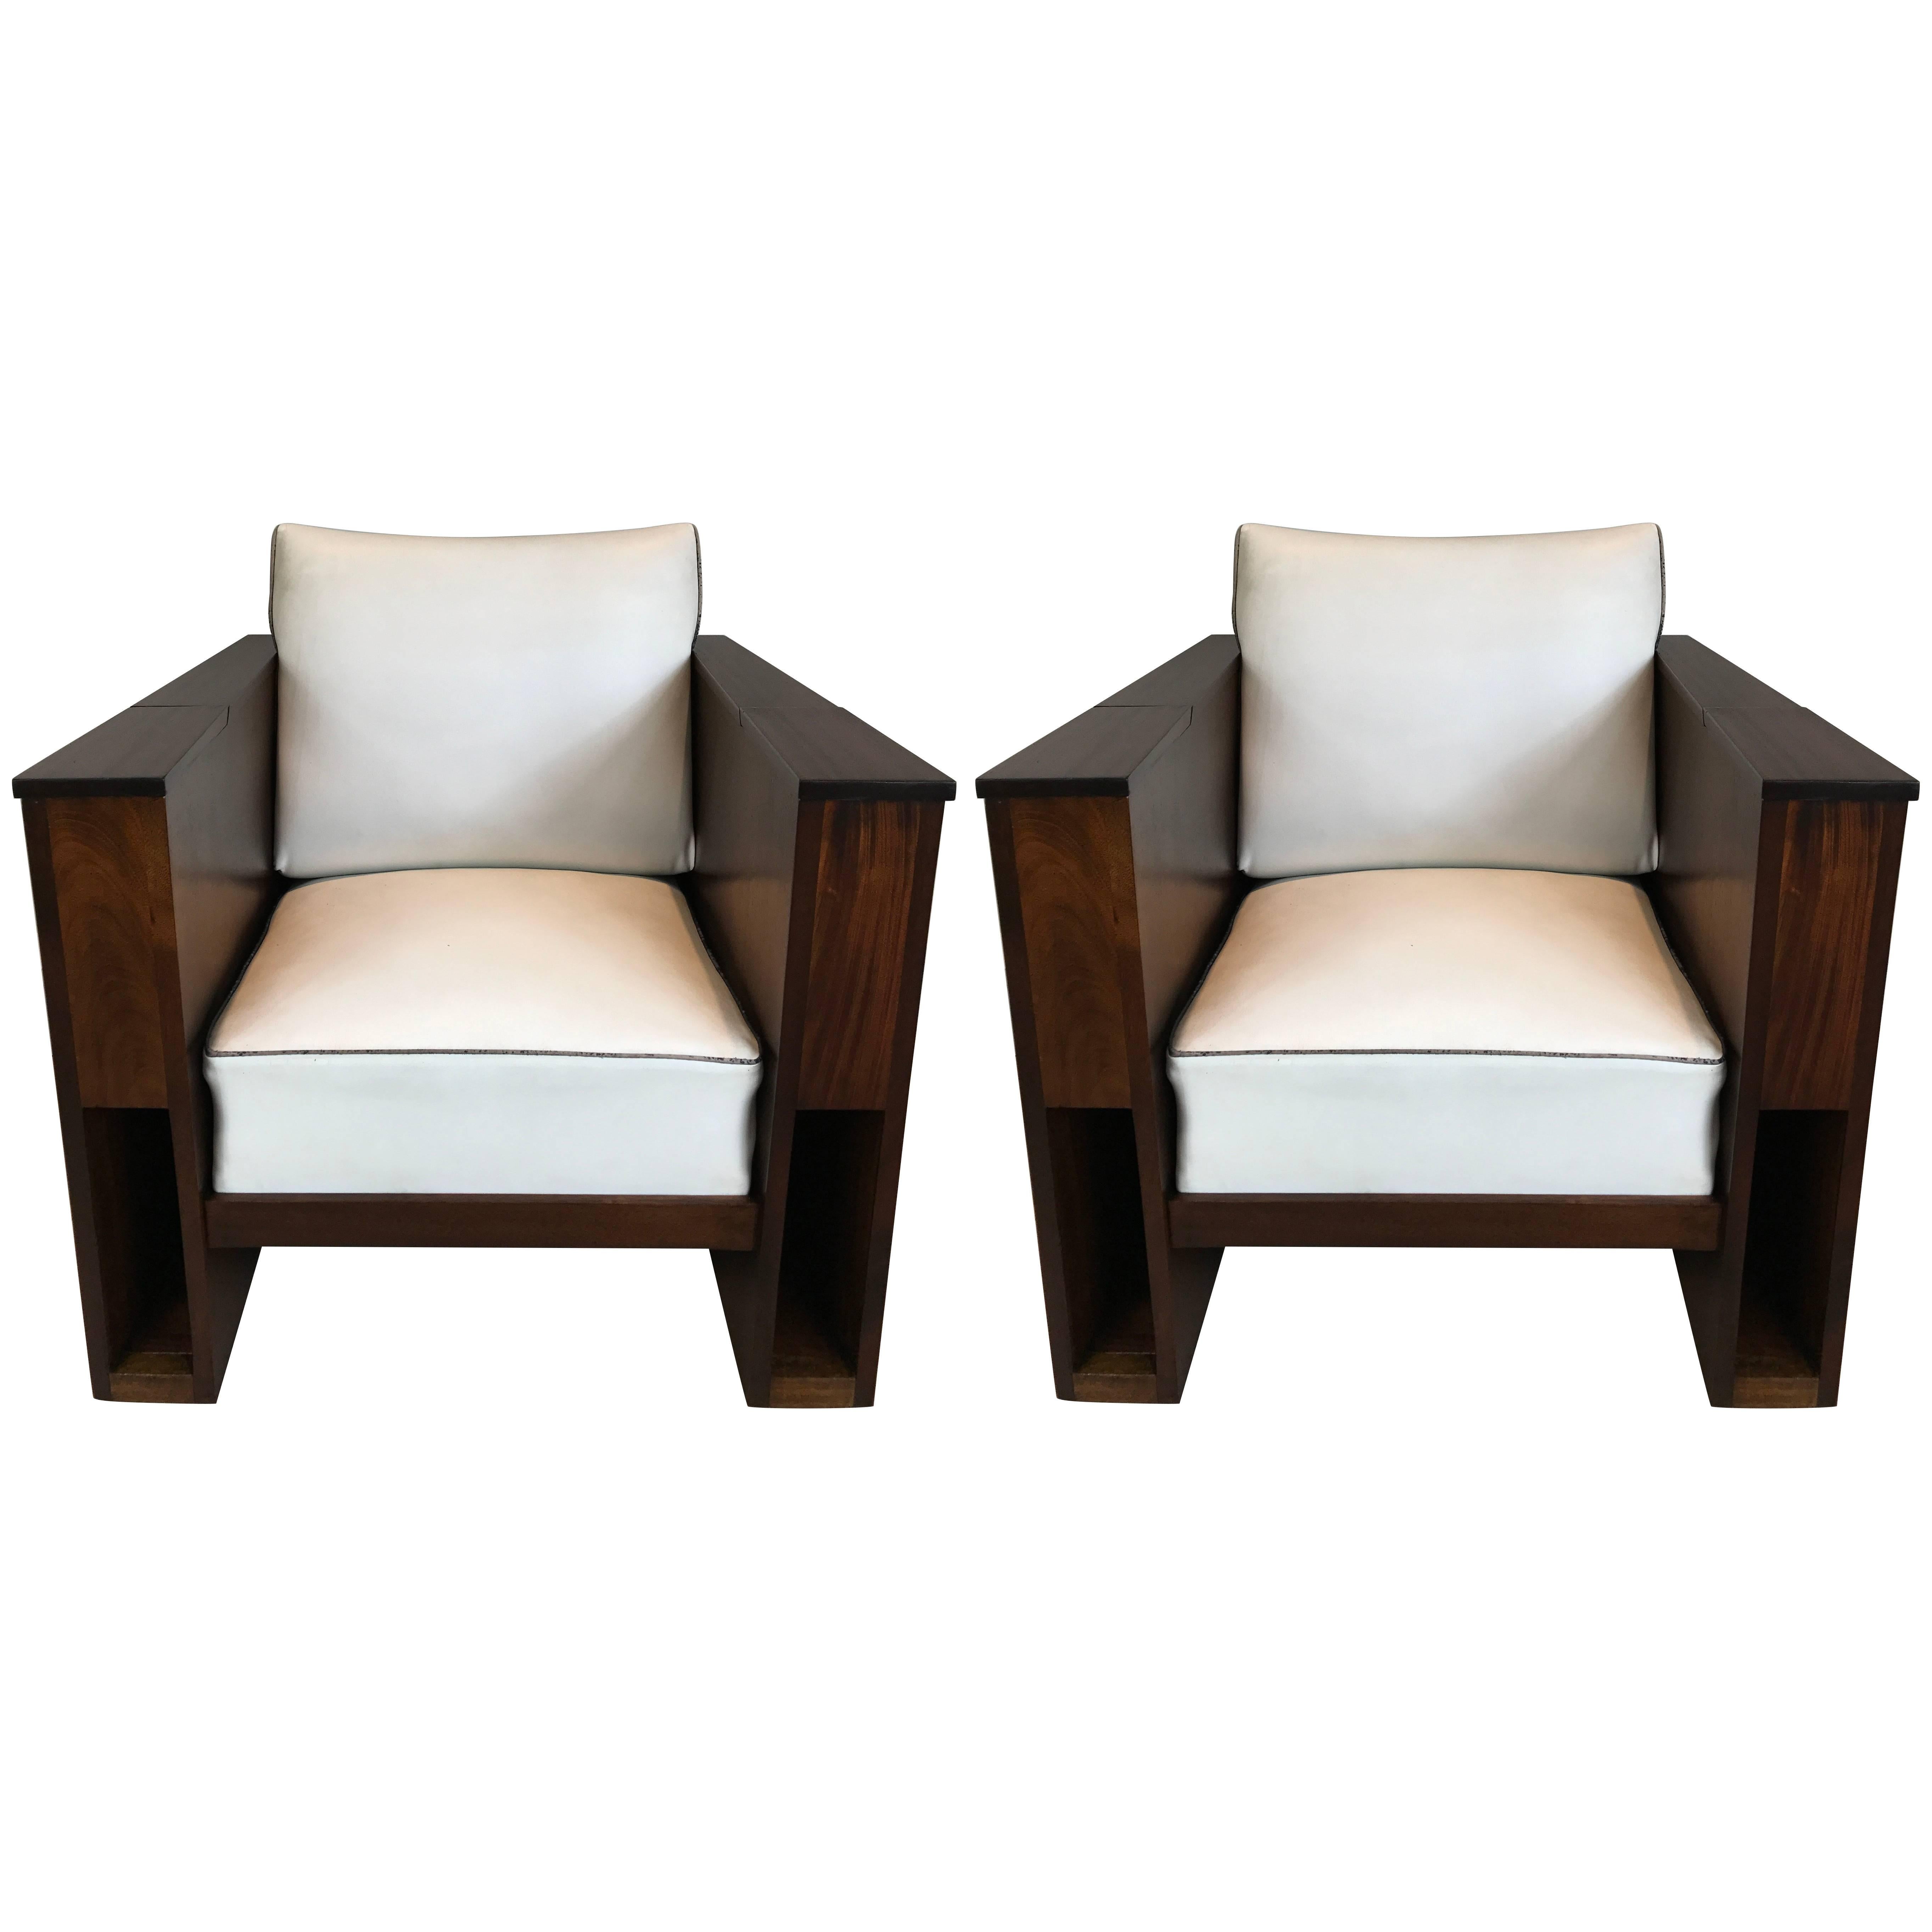 Stunning and rare pair of Art Deco mahogany case club chairs. A great example with architectural front alcoves and flip-top compartments on each arm. Original upholstery but we provide upholstery service in customers own material depending on